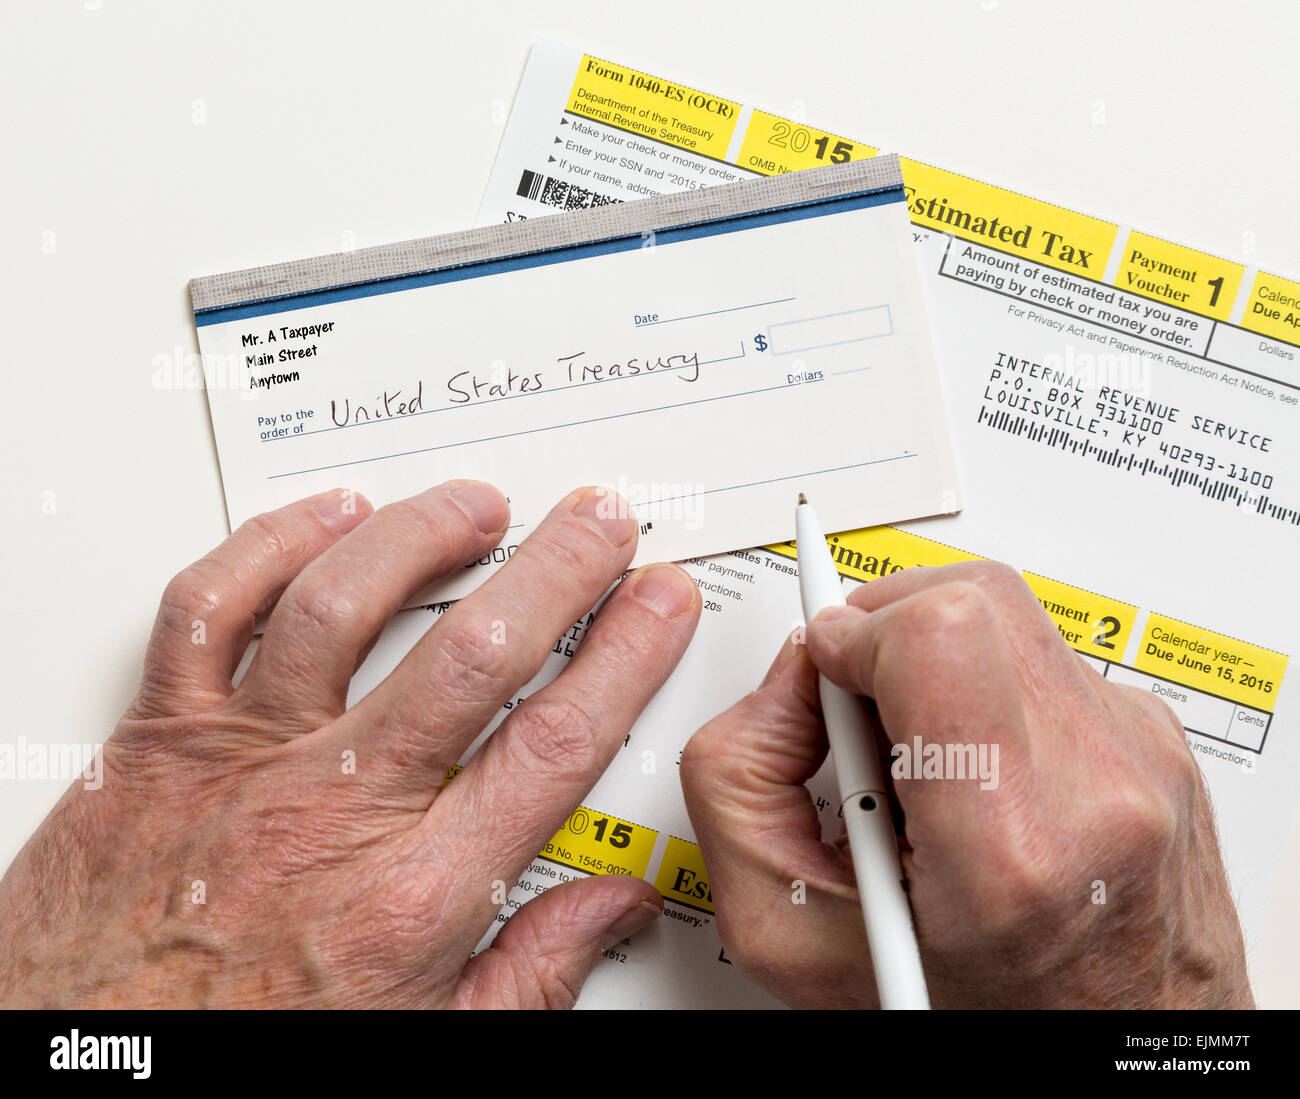 Male caucasian hands writing check to Internal revenue service IRS